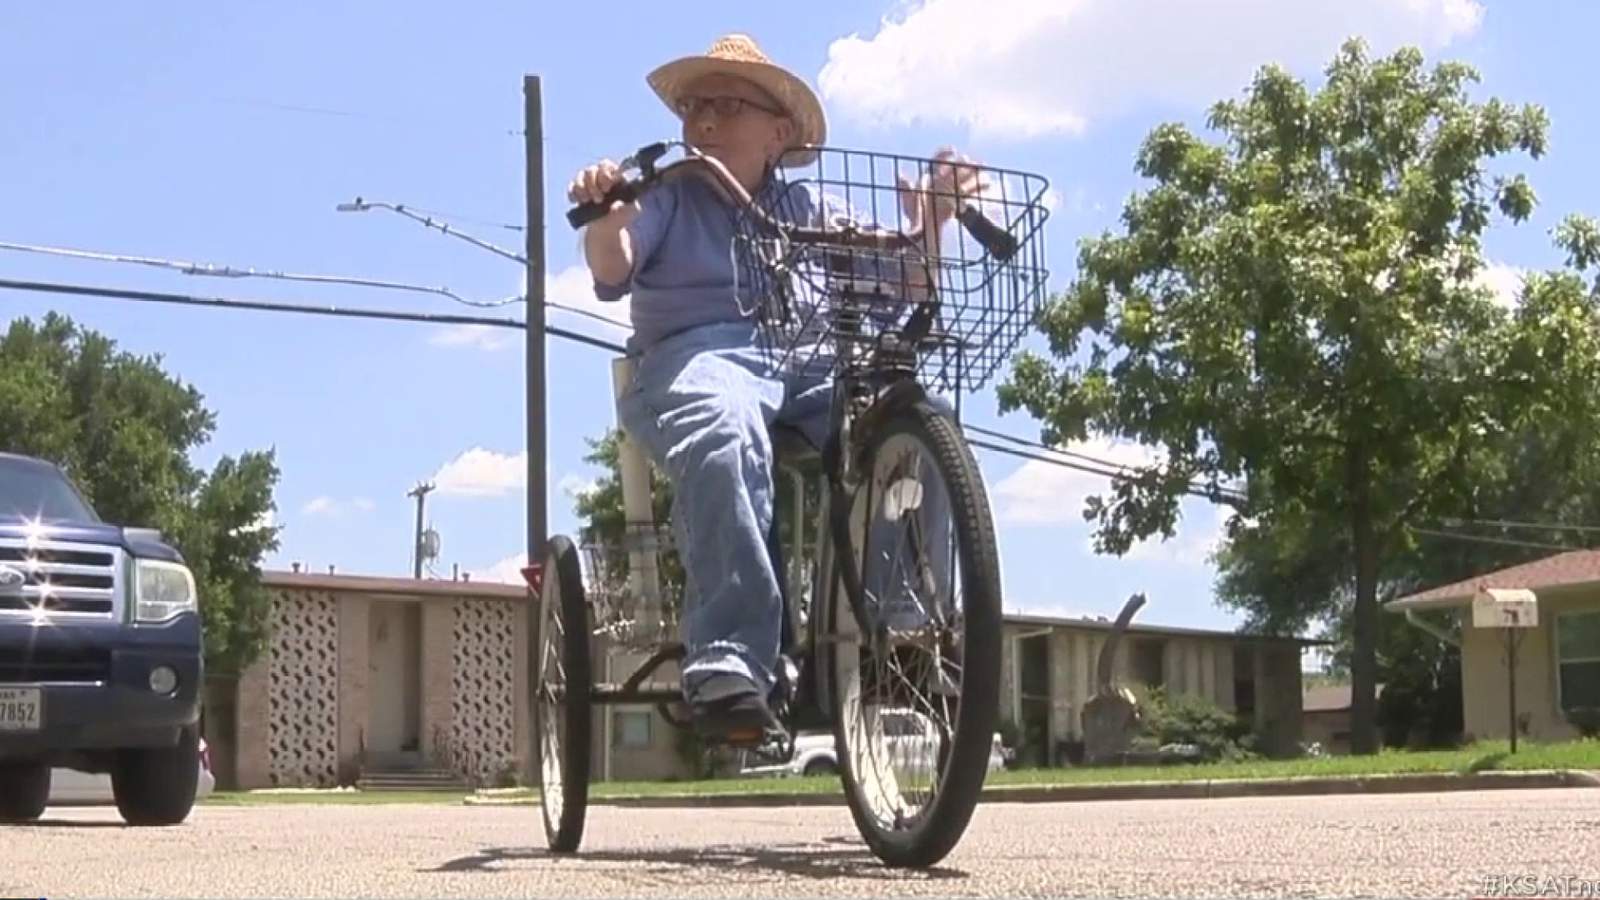 Social media users help 91-year-old veterans family find his missing bicycle